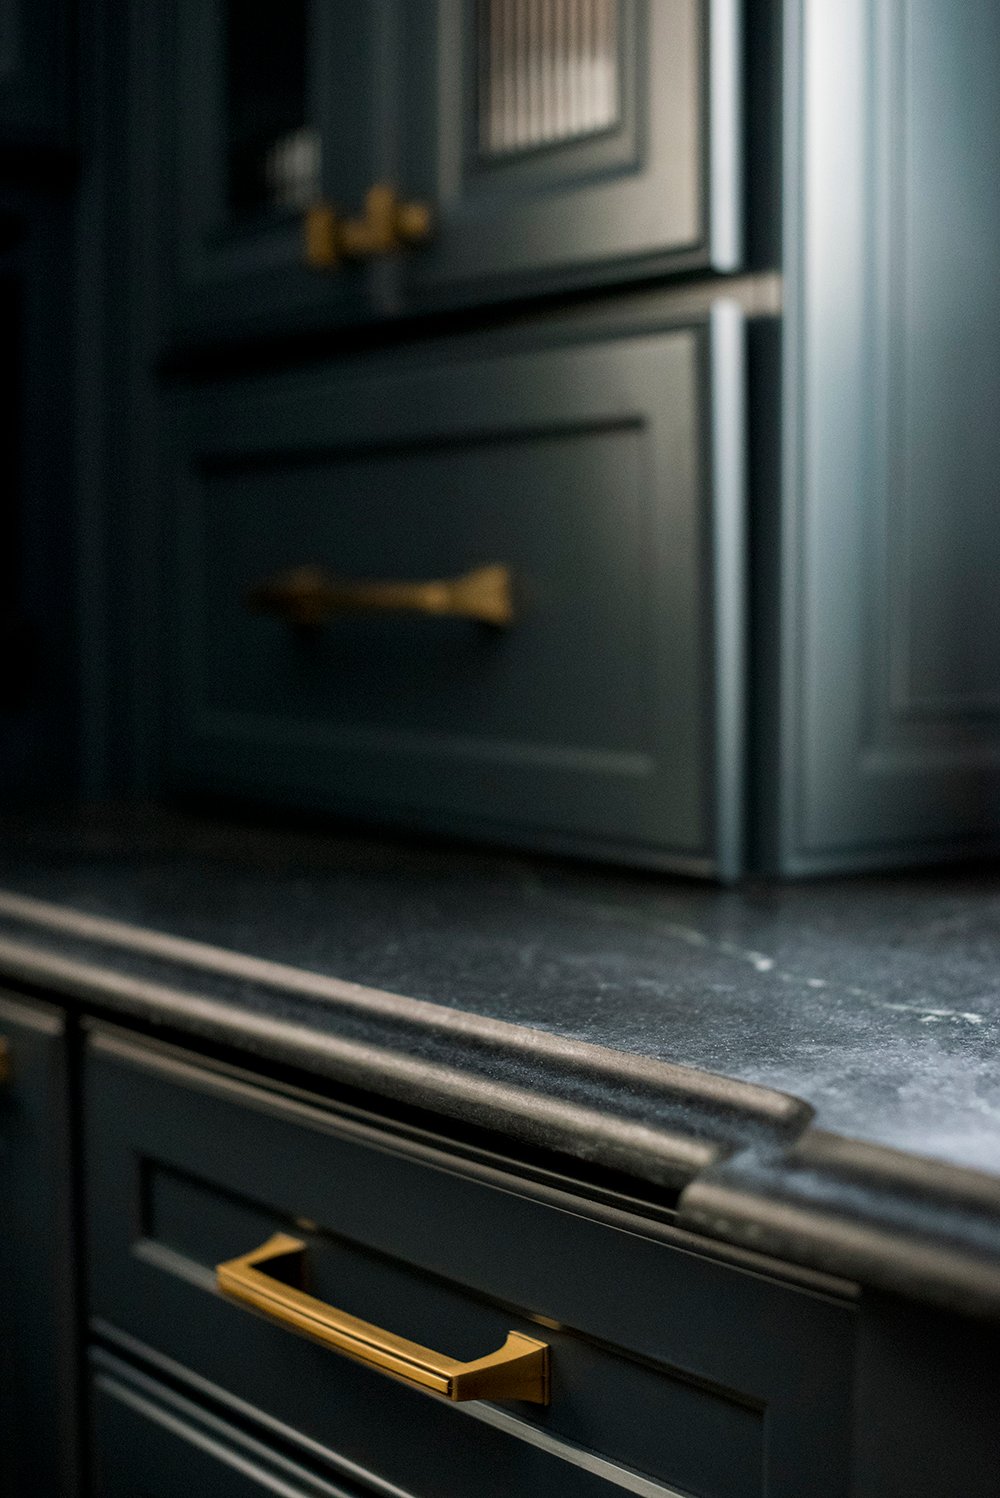 Why We Used Soapstone In Our Kitchen... Again - roomfortuesday.com